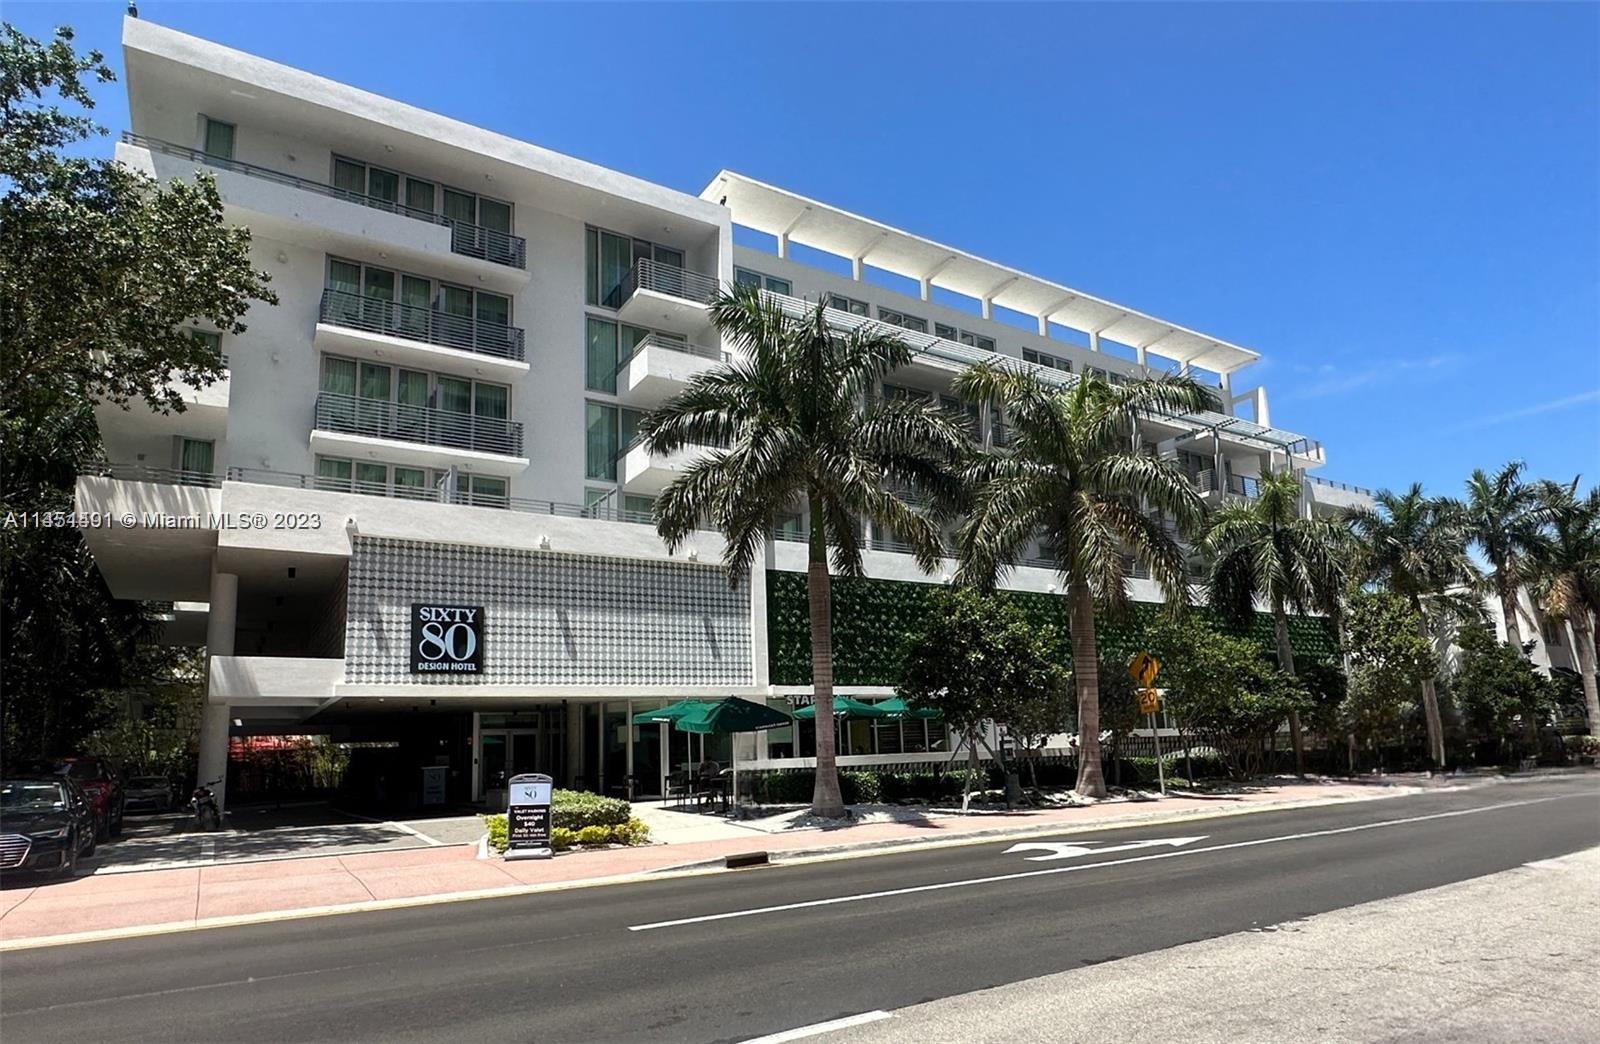 Great Investment Opportunity: Flexible rentals - minimum 1 day. Modern, chic condo hotel, mid beach, great location on Collins Ave. Starbucks in lobby, pool and gym on terrace. Walk to the beach, restaurants, cafes, shops. Fully furnished and equipped. The unit is in the hotel rental program.